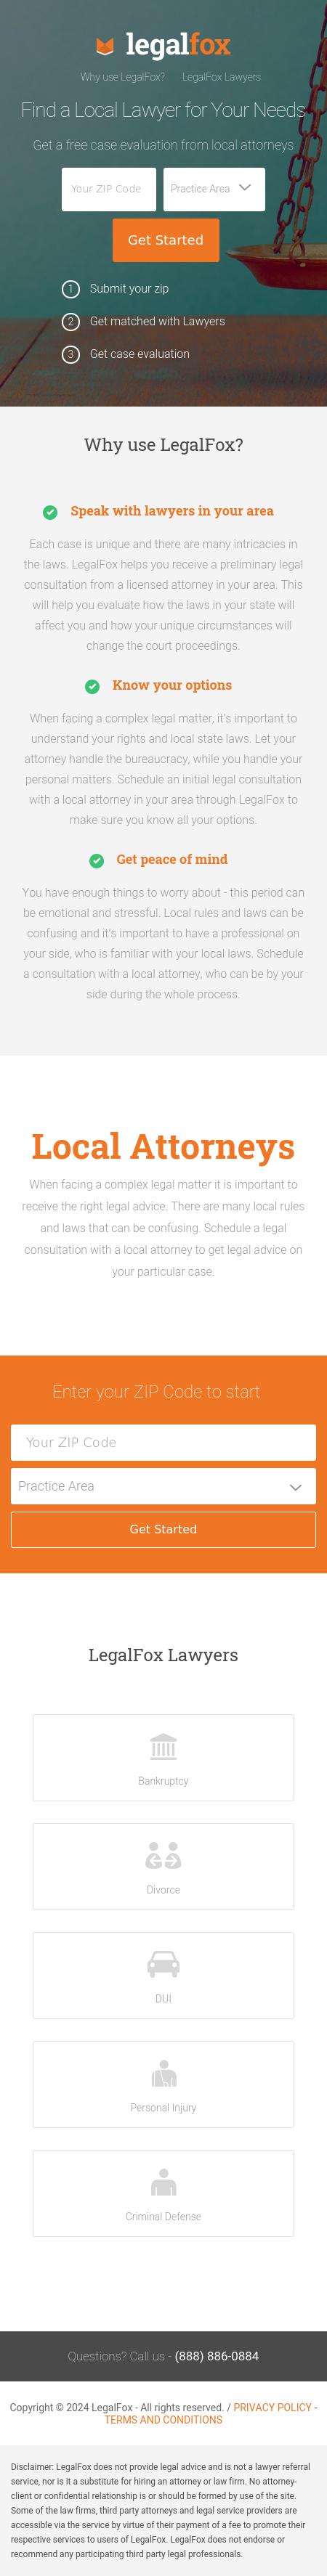 Find a Local Attorney - Greensboro NC Lawyers